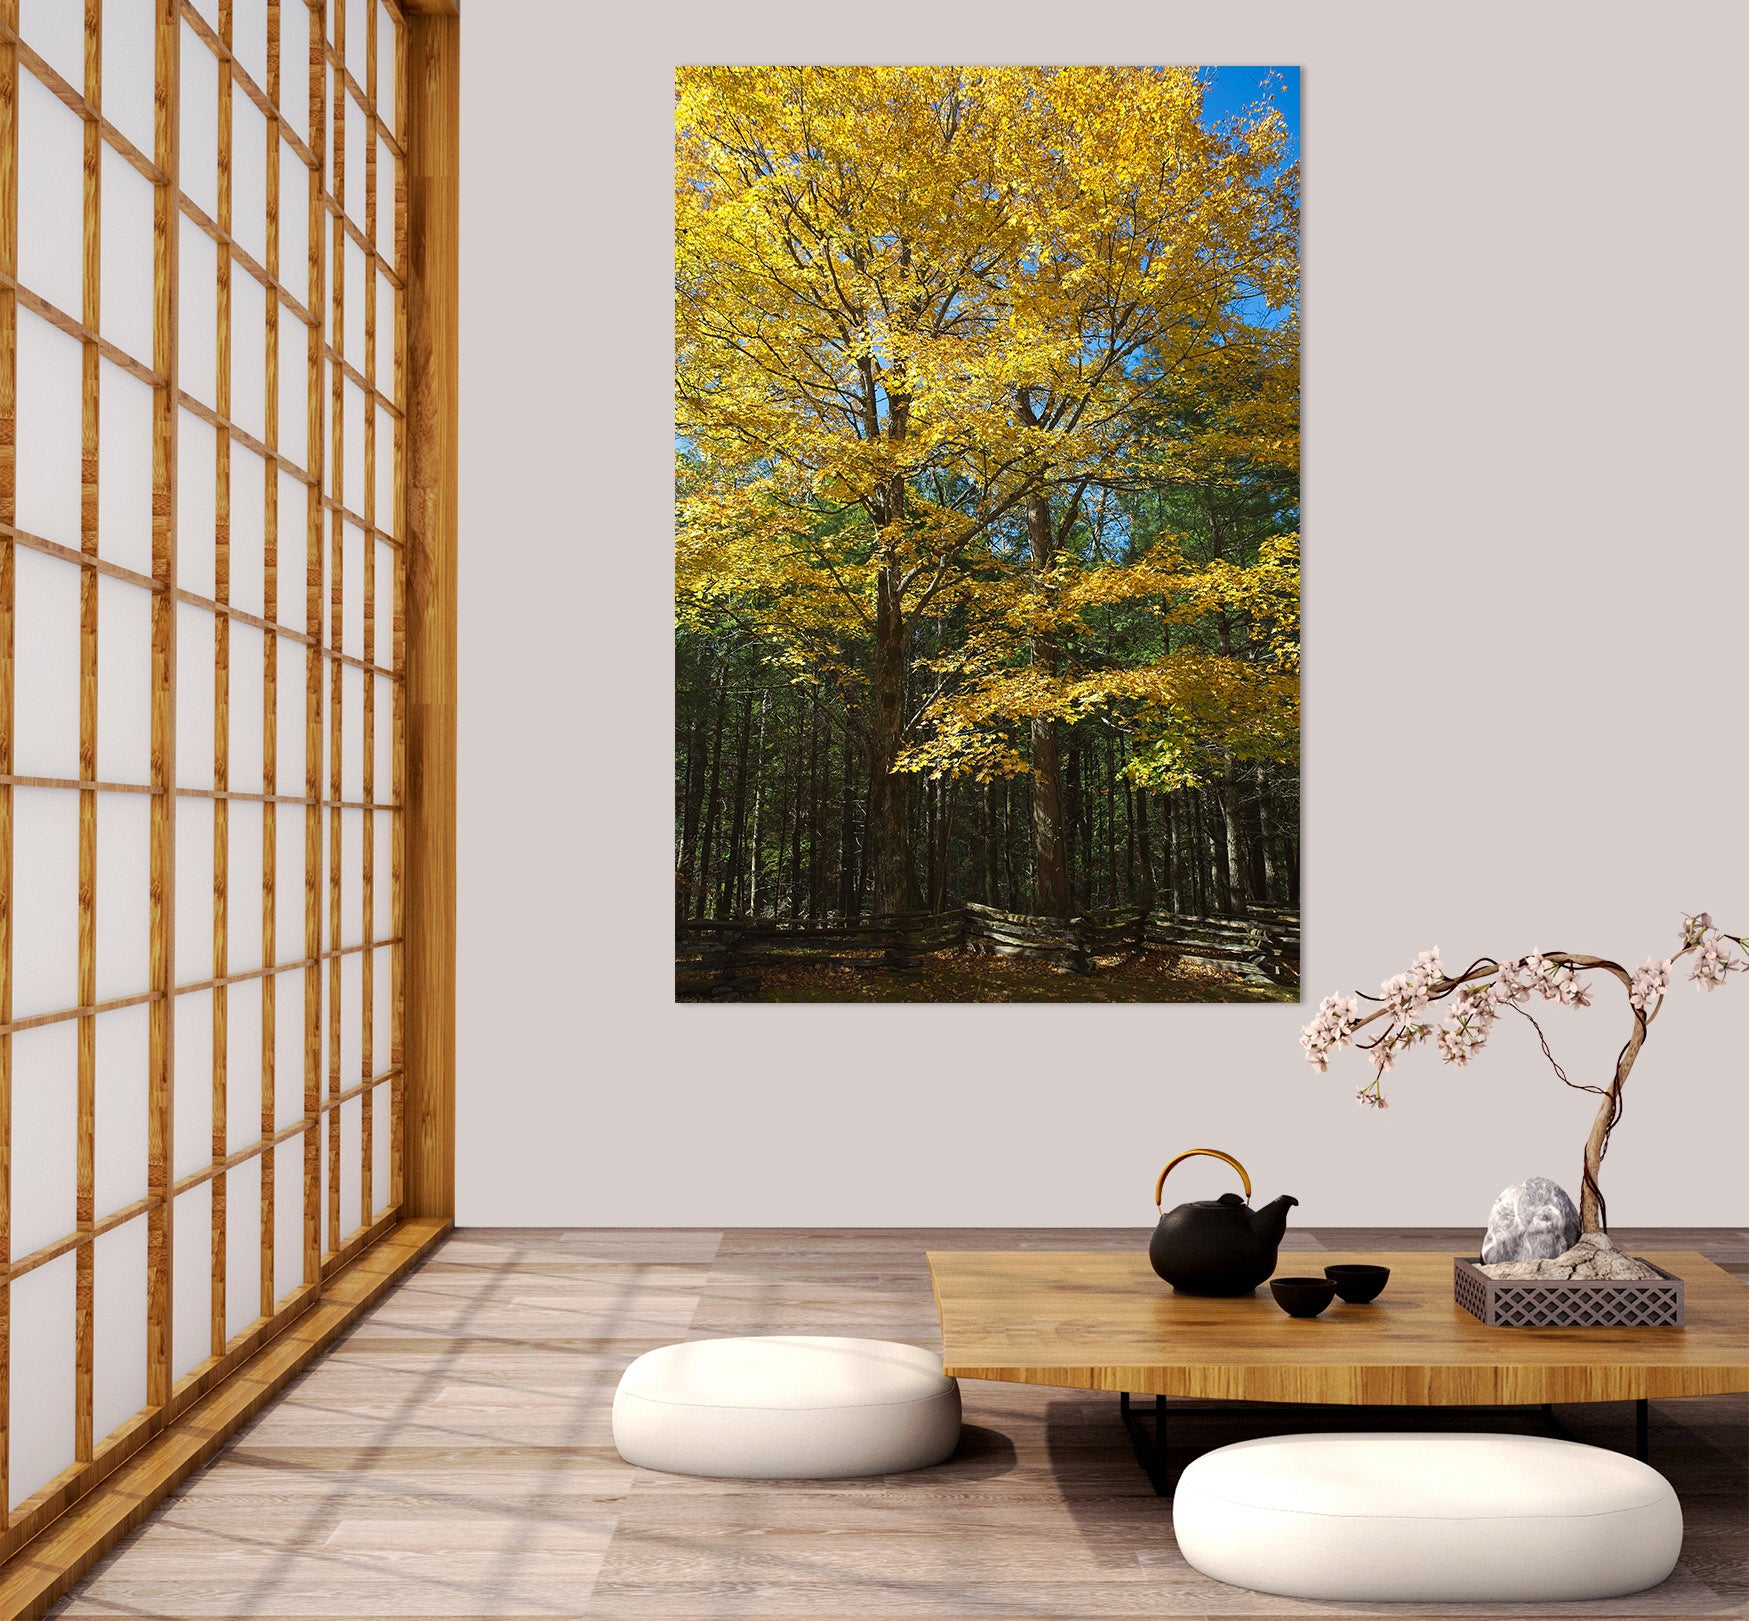 3D Sunny Forest 041 Kathy Barefield Wall Sticker